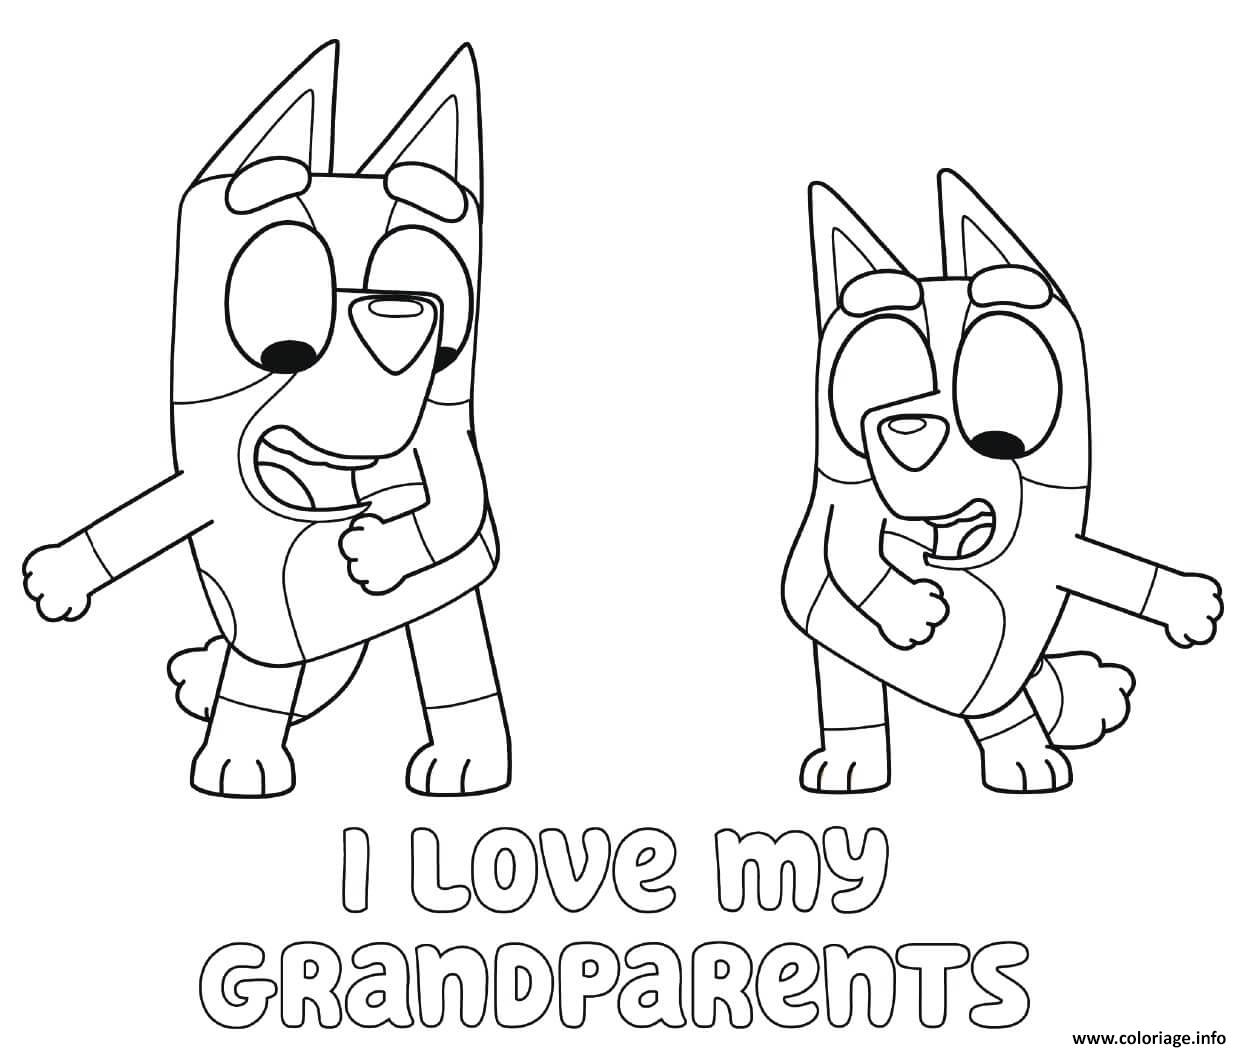 bingo and bluey coloring pages